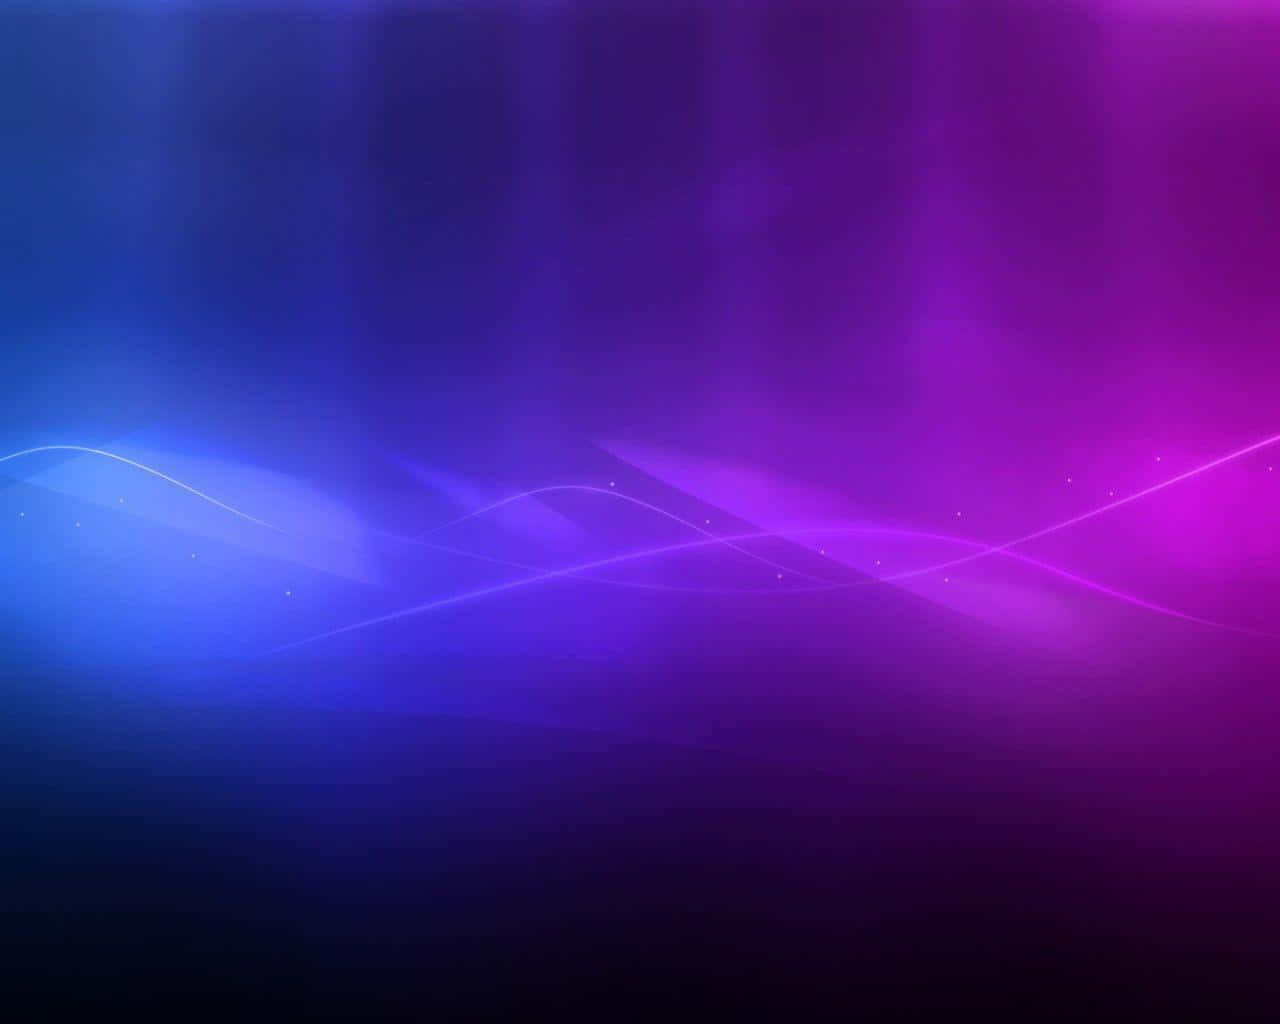 Beautifully vibrant blue and purple background